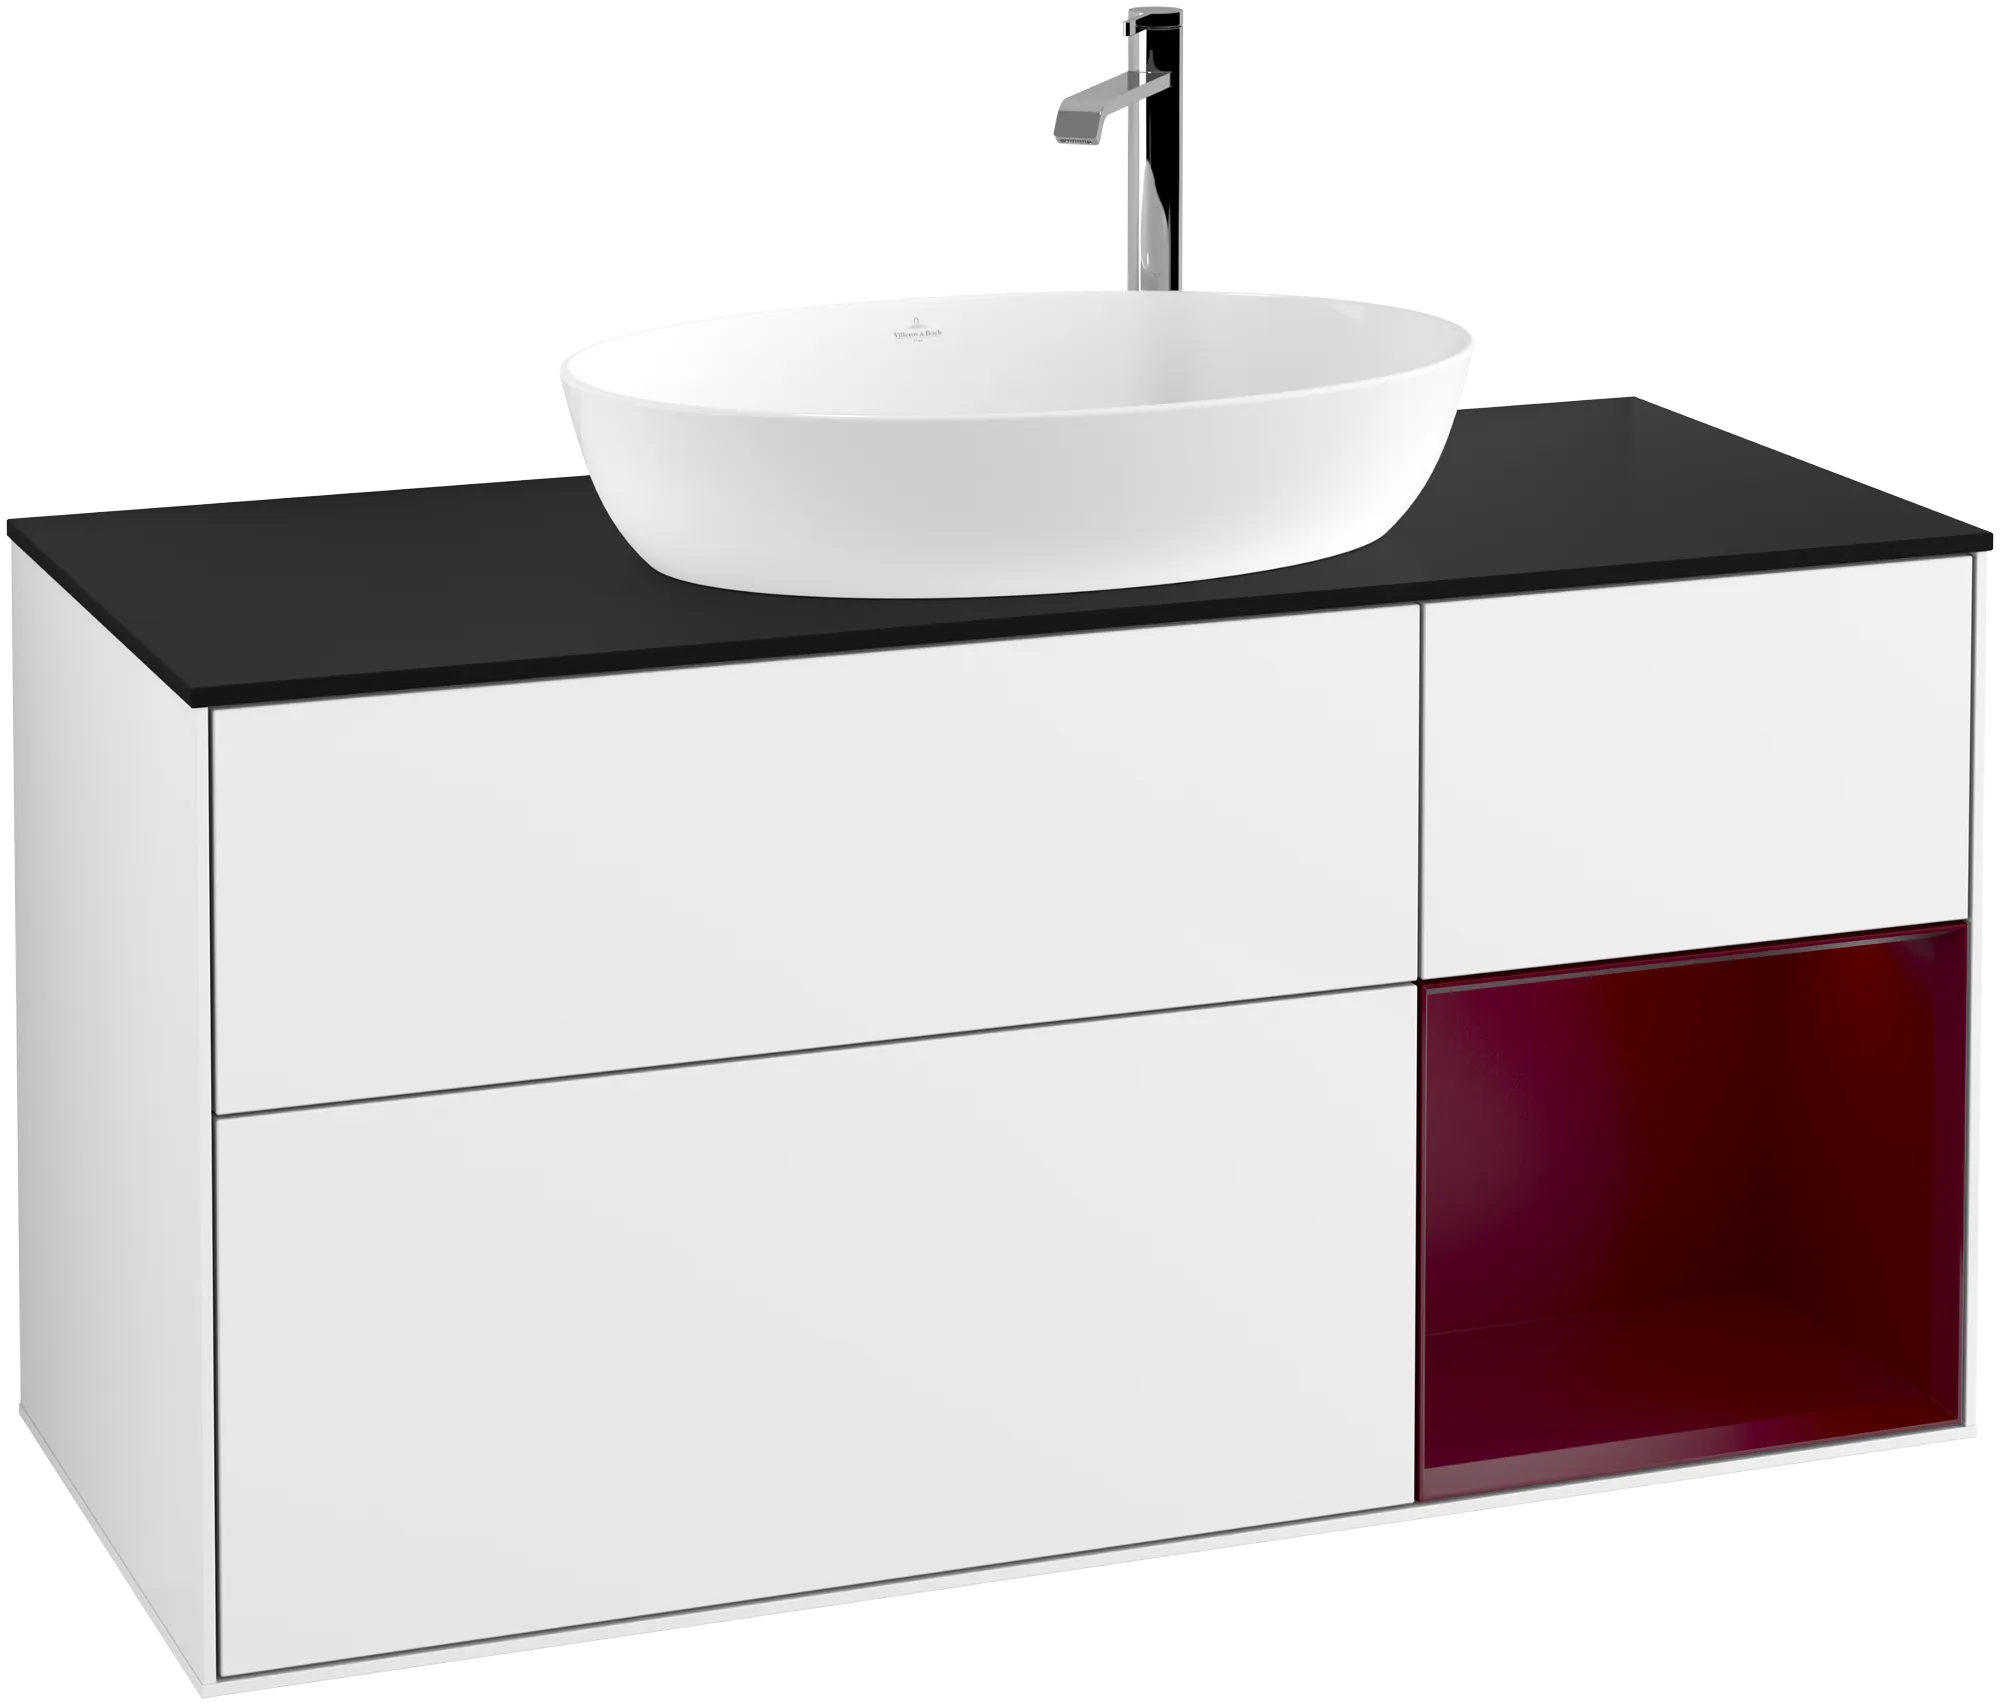 VILLEROY BOCH Finion Vanity unit, with lighting, 3 pull-out compartments, 1200 x 603 x 501 mm, Glossy White Lacquer / Peony Matt Lacquer / Glass Black Matt #G952HBGF resmi